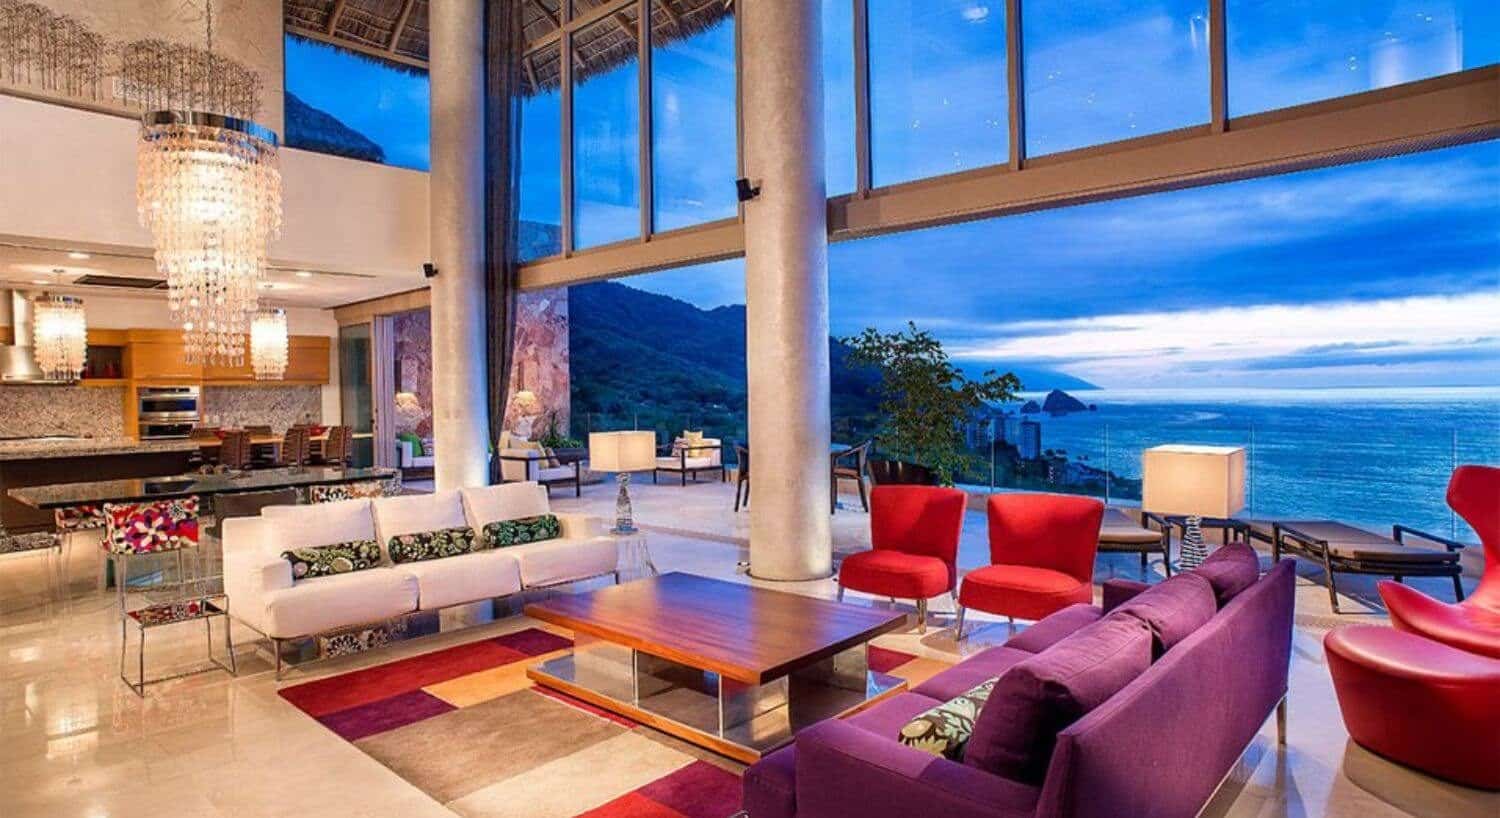 A large room with a living area of white, red, and purple furnishings, a dining table and chairs, a kitchen, and open windows all the way across the entire area opening out to an outdoor living area with stunning views of Banderas Bay.